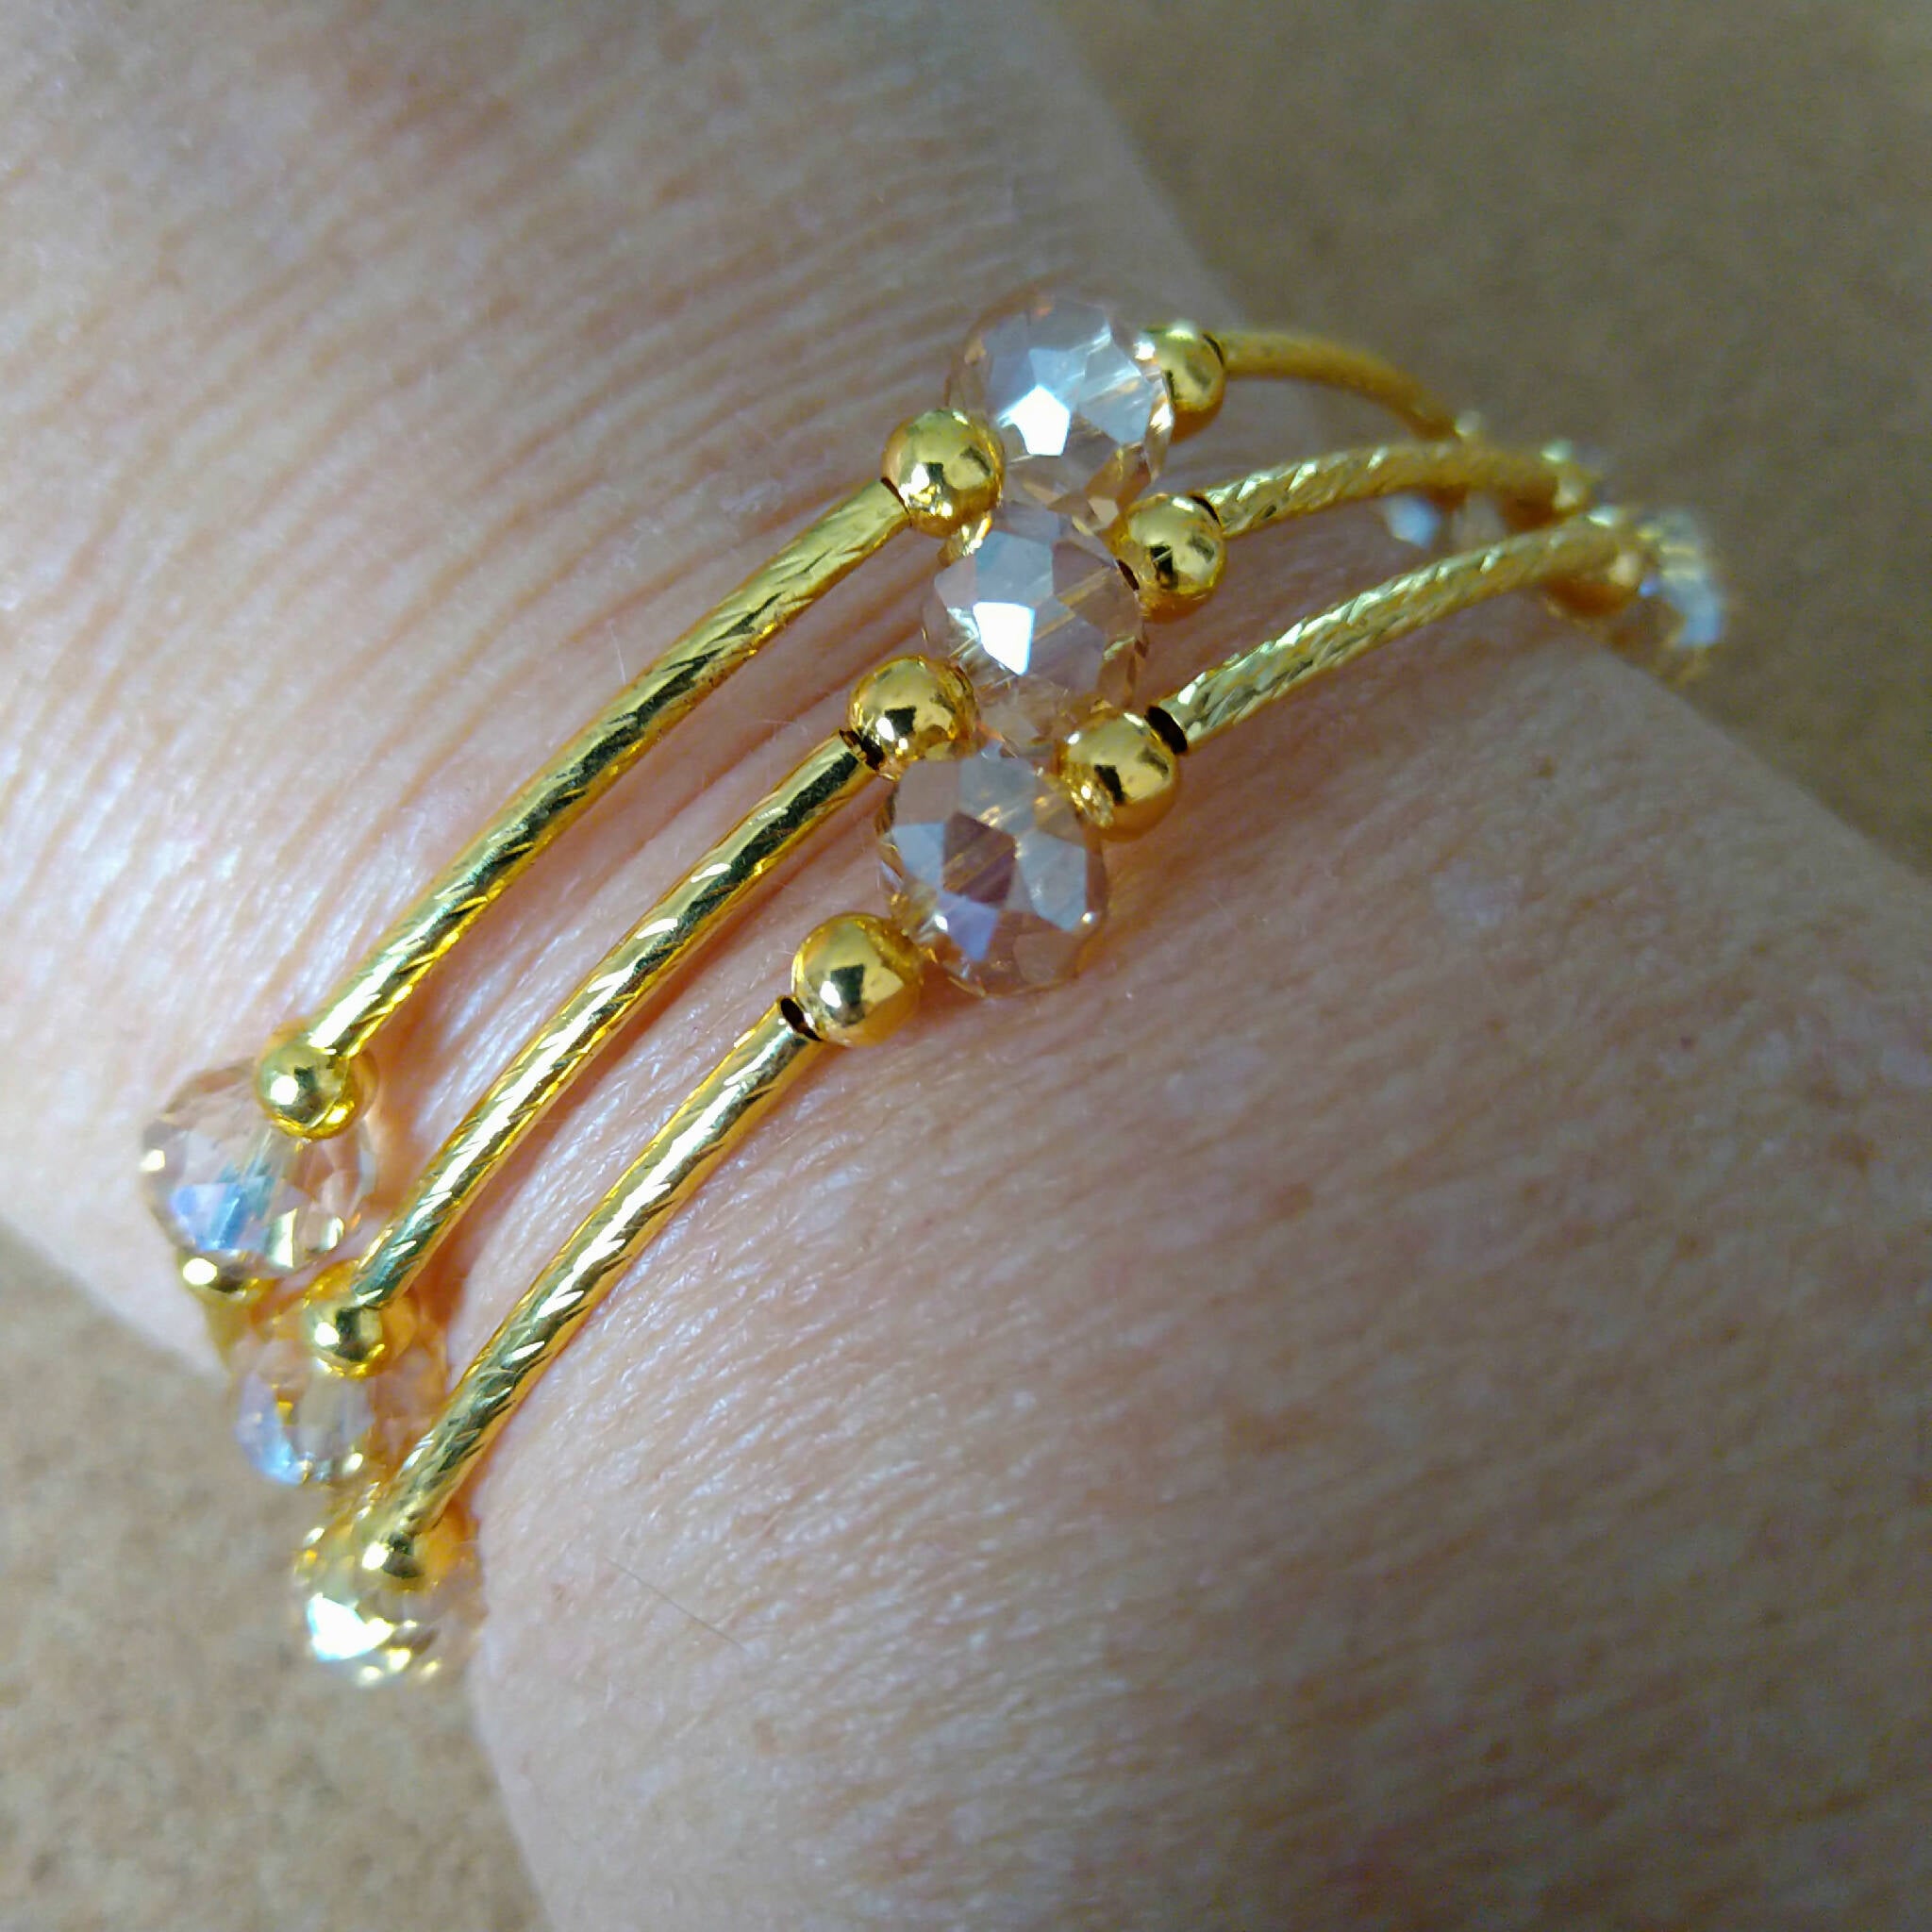 3 strand gold toned memory wire bangle with champagne & gold beads, 6cm diameter